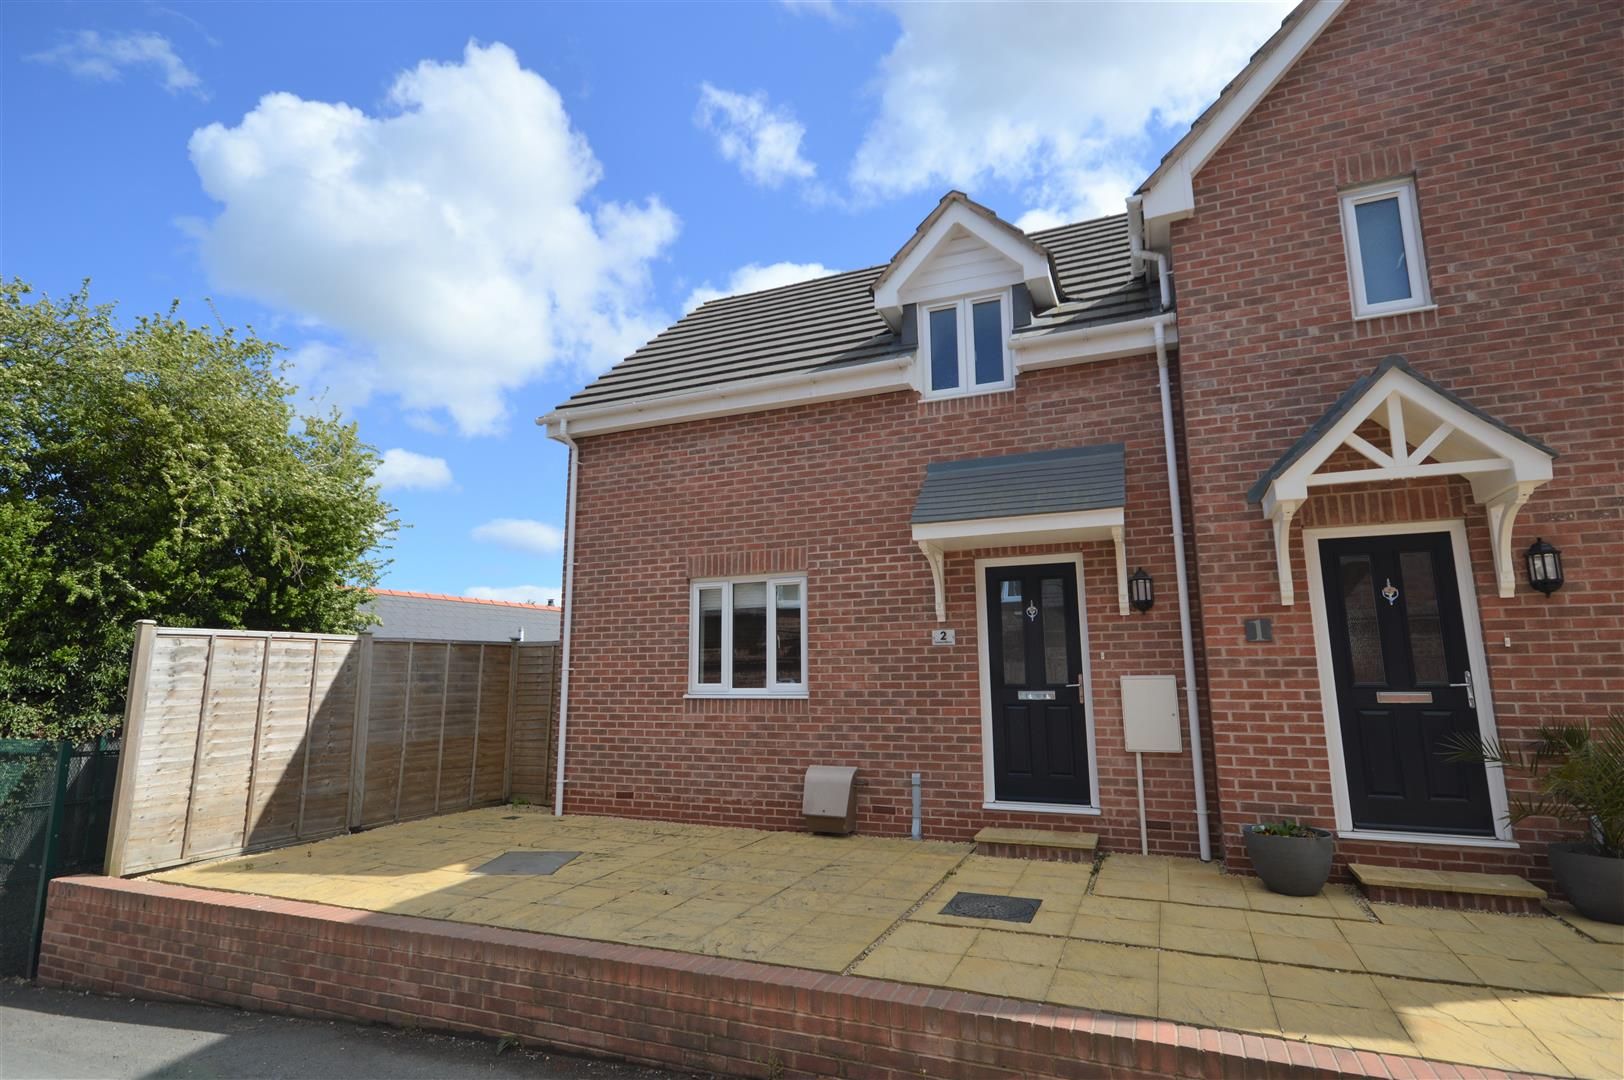 3 bed semi-detached for sale in Leominster, HR6